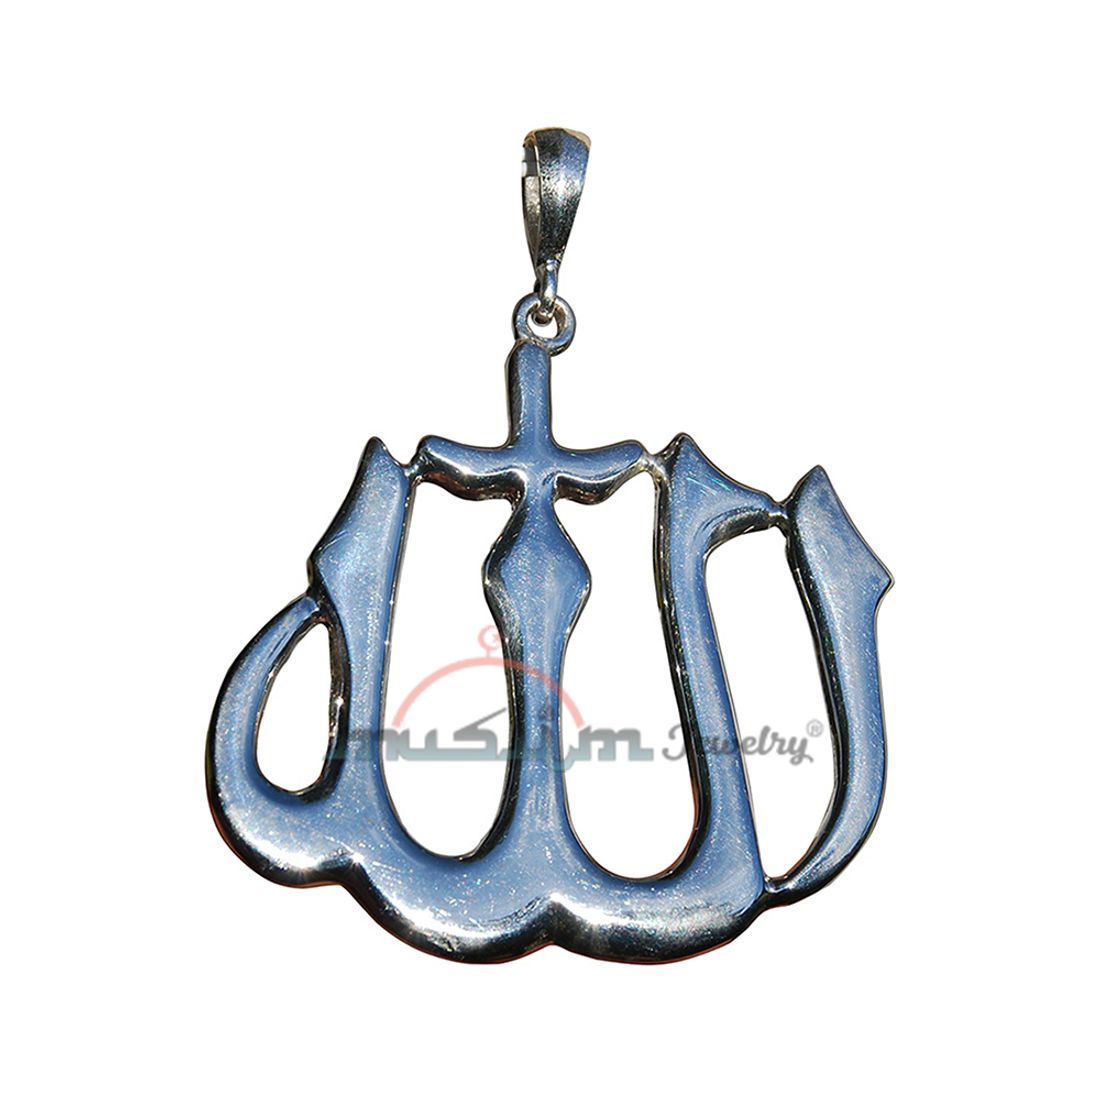 Allah of Name Pendant Med-size Sterling Silver Bold Font Arabic